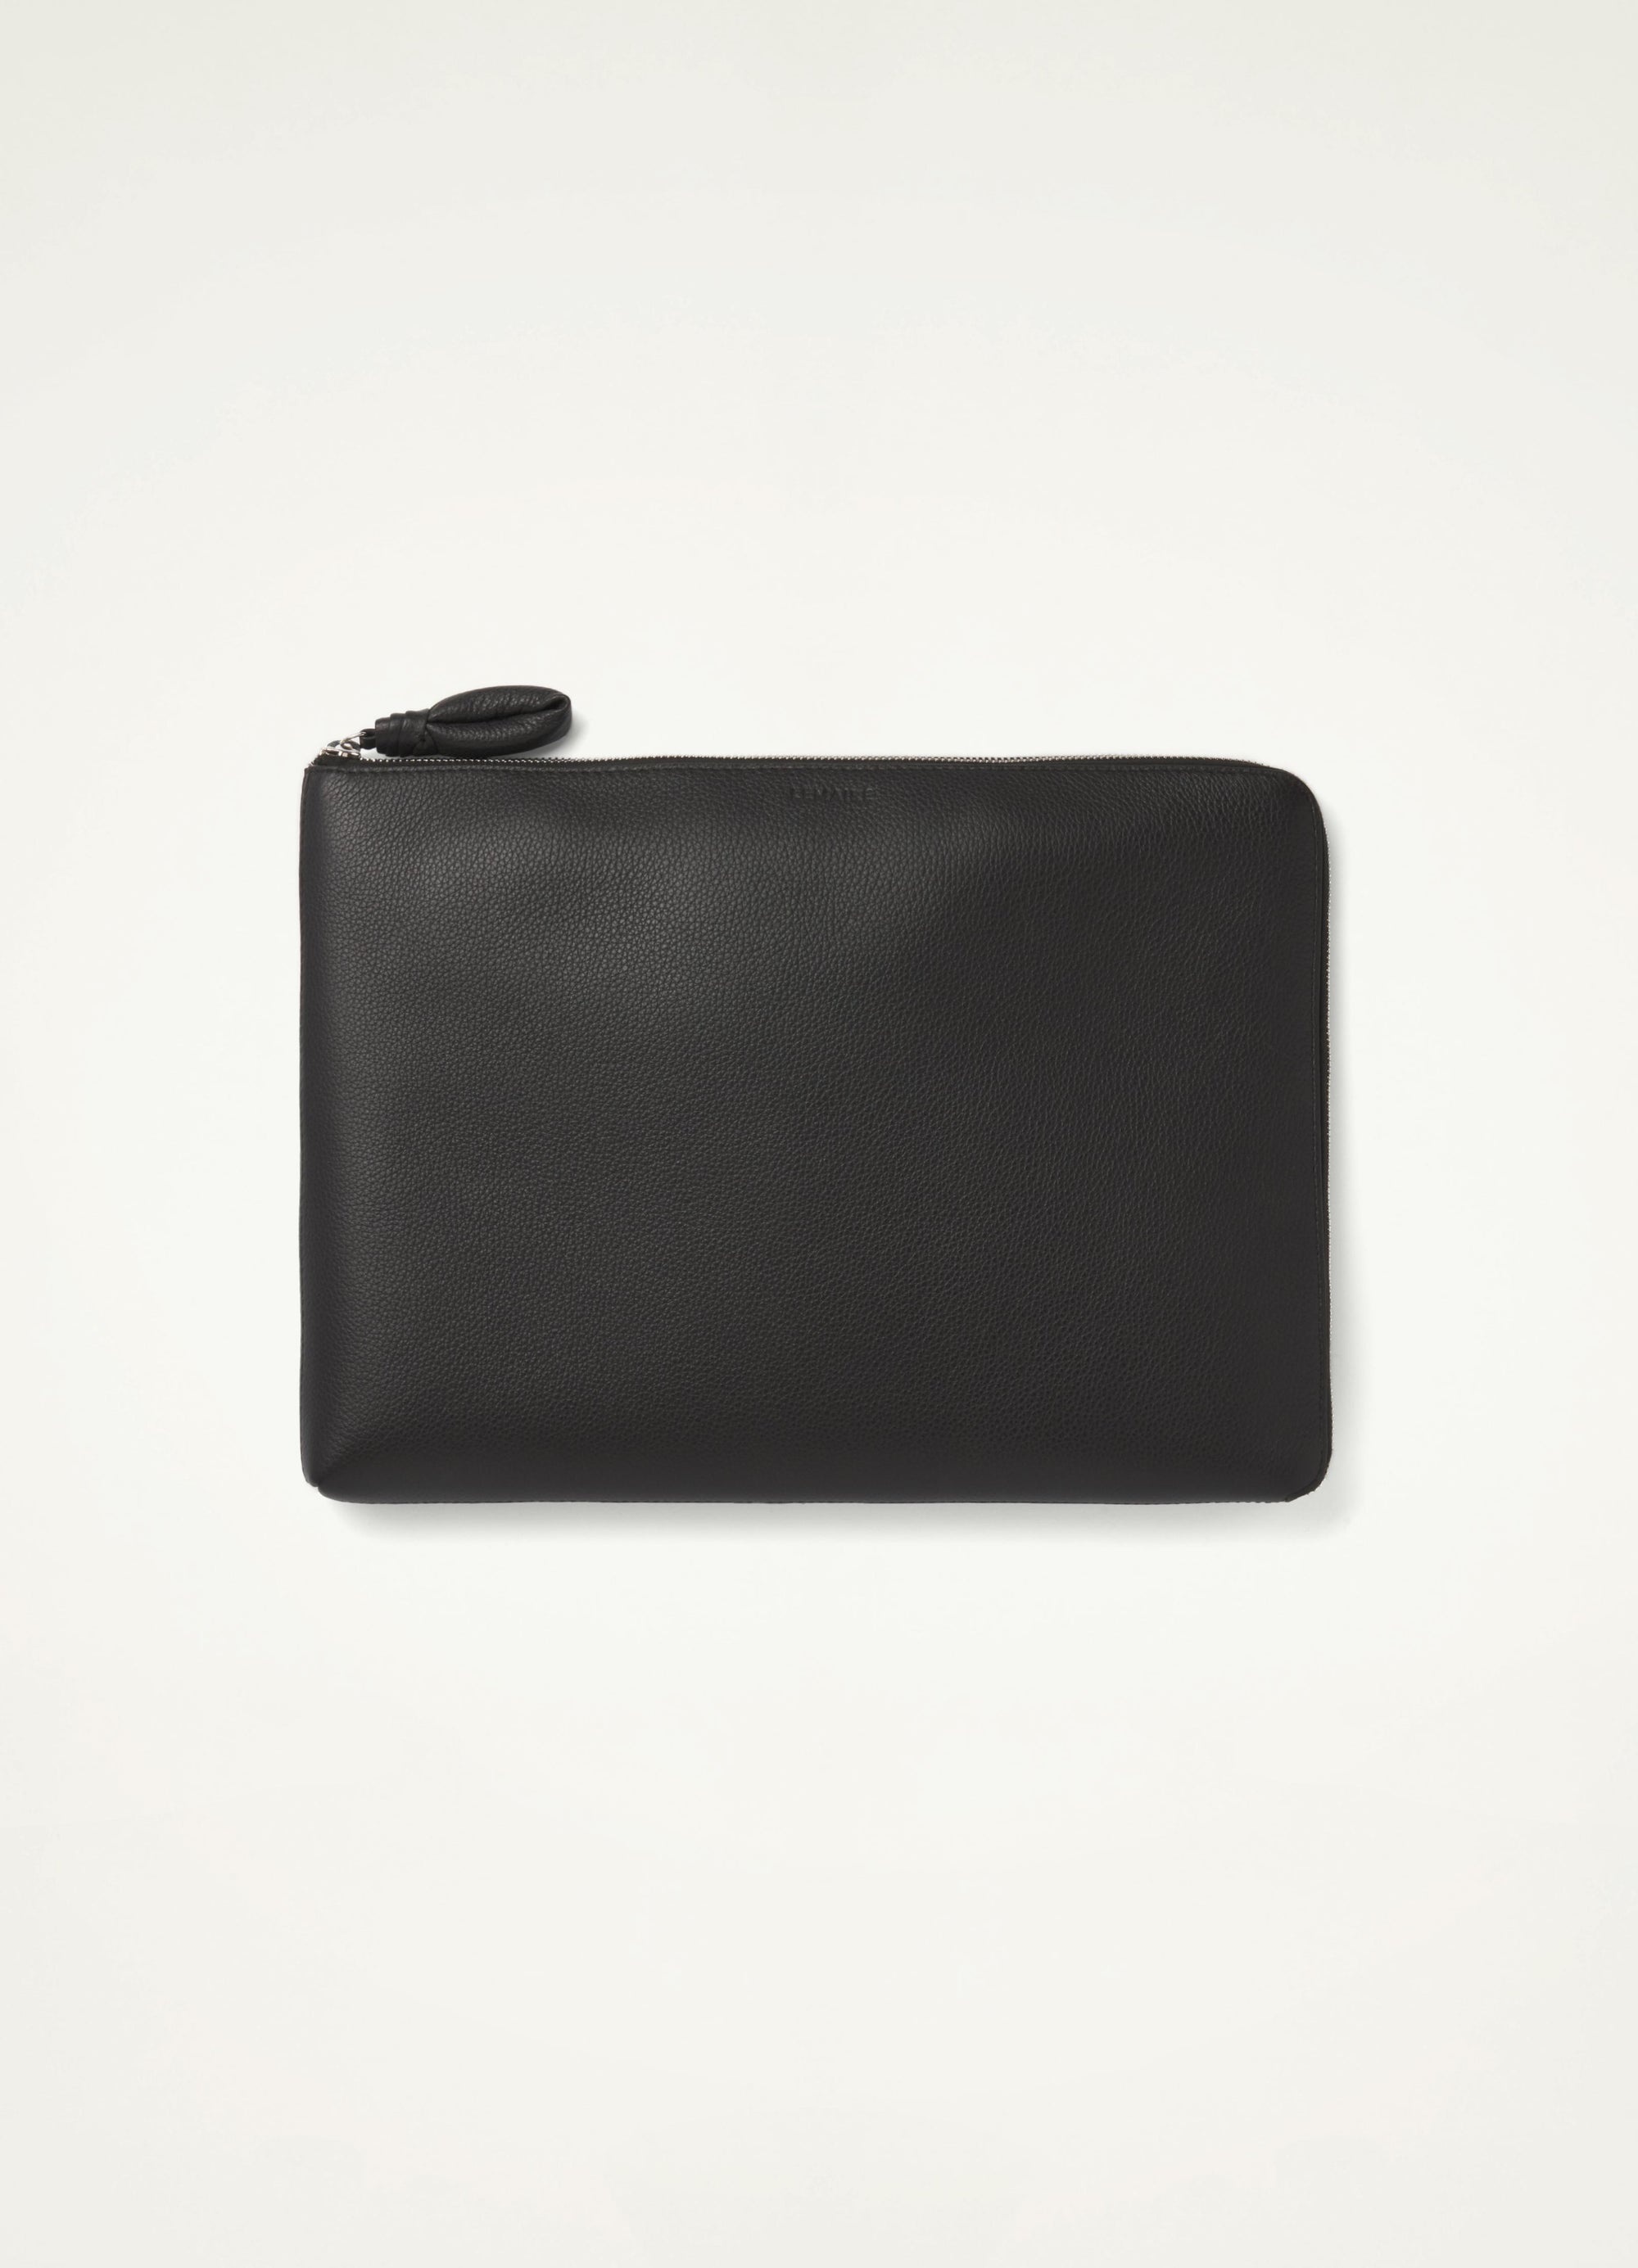 DOCUMENT HOLDER
SOFT GRAINED LEATHER - 5